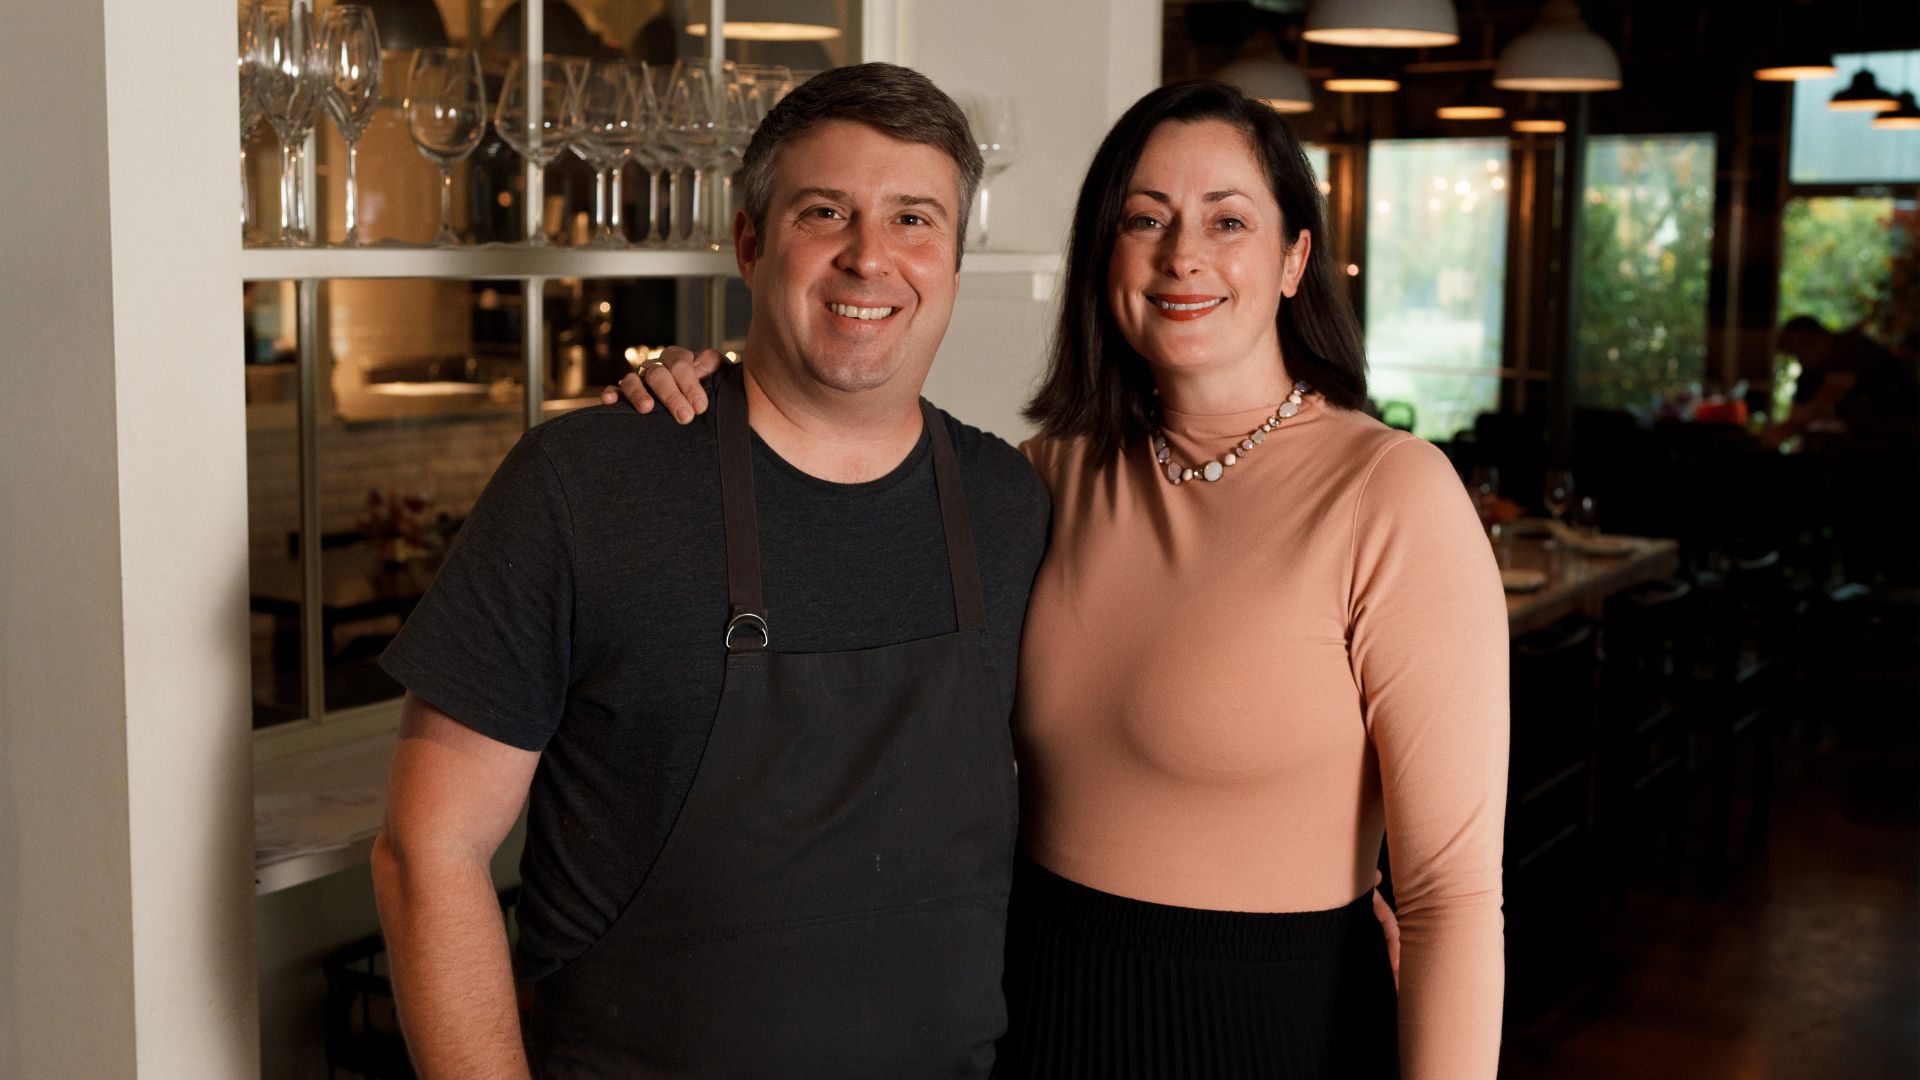 Michael and Tara Gallina pose at Vicia, which serves vegetable-forward cuisine in the Cortex Innovation District.